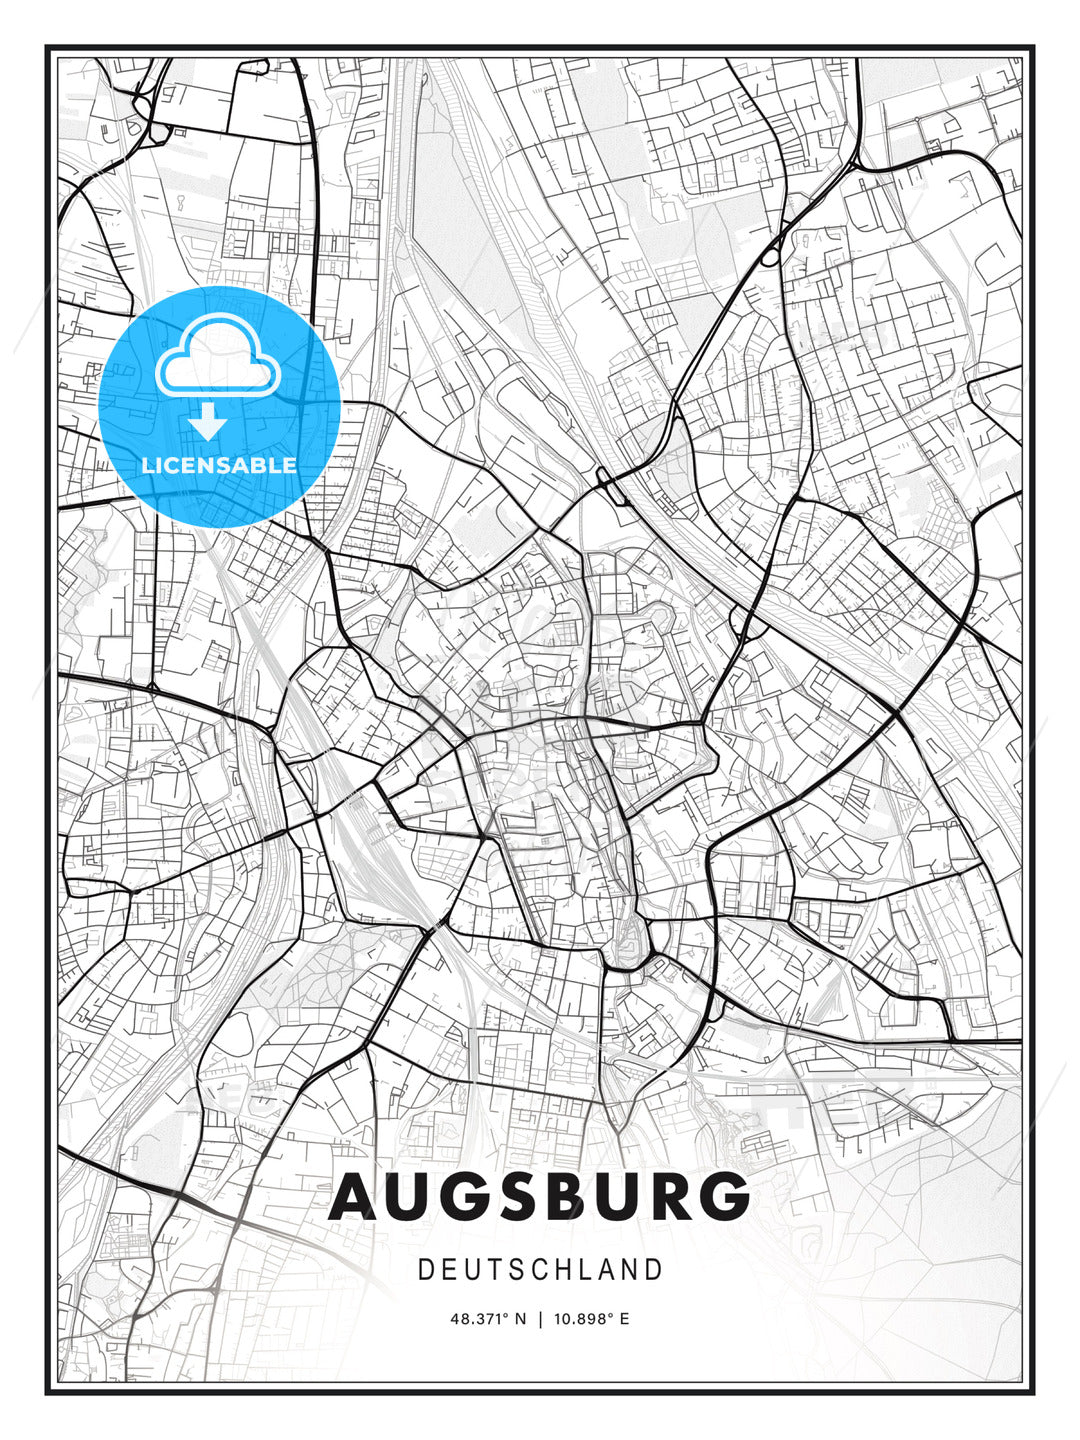 Augsburg, Germany, Modern Print Template in Various Formats - HEBSTREITS Sketches